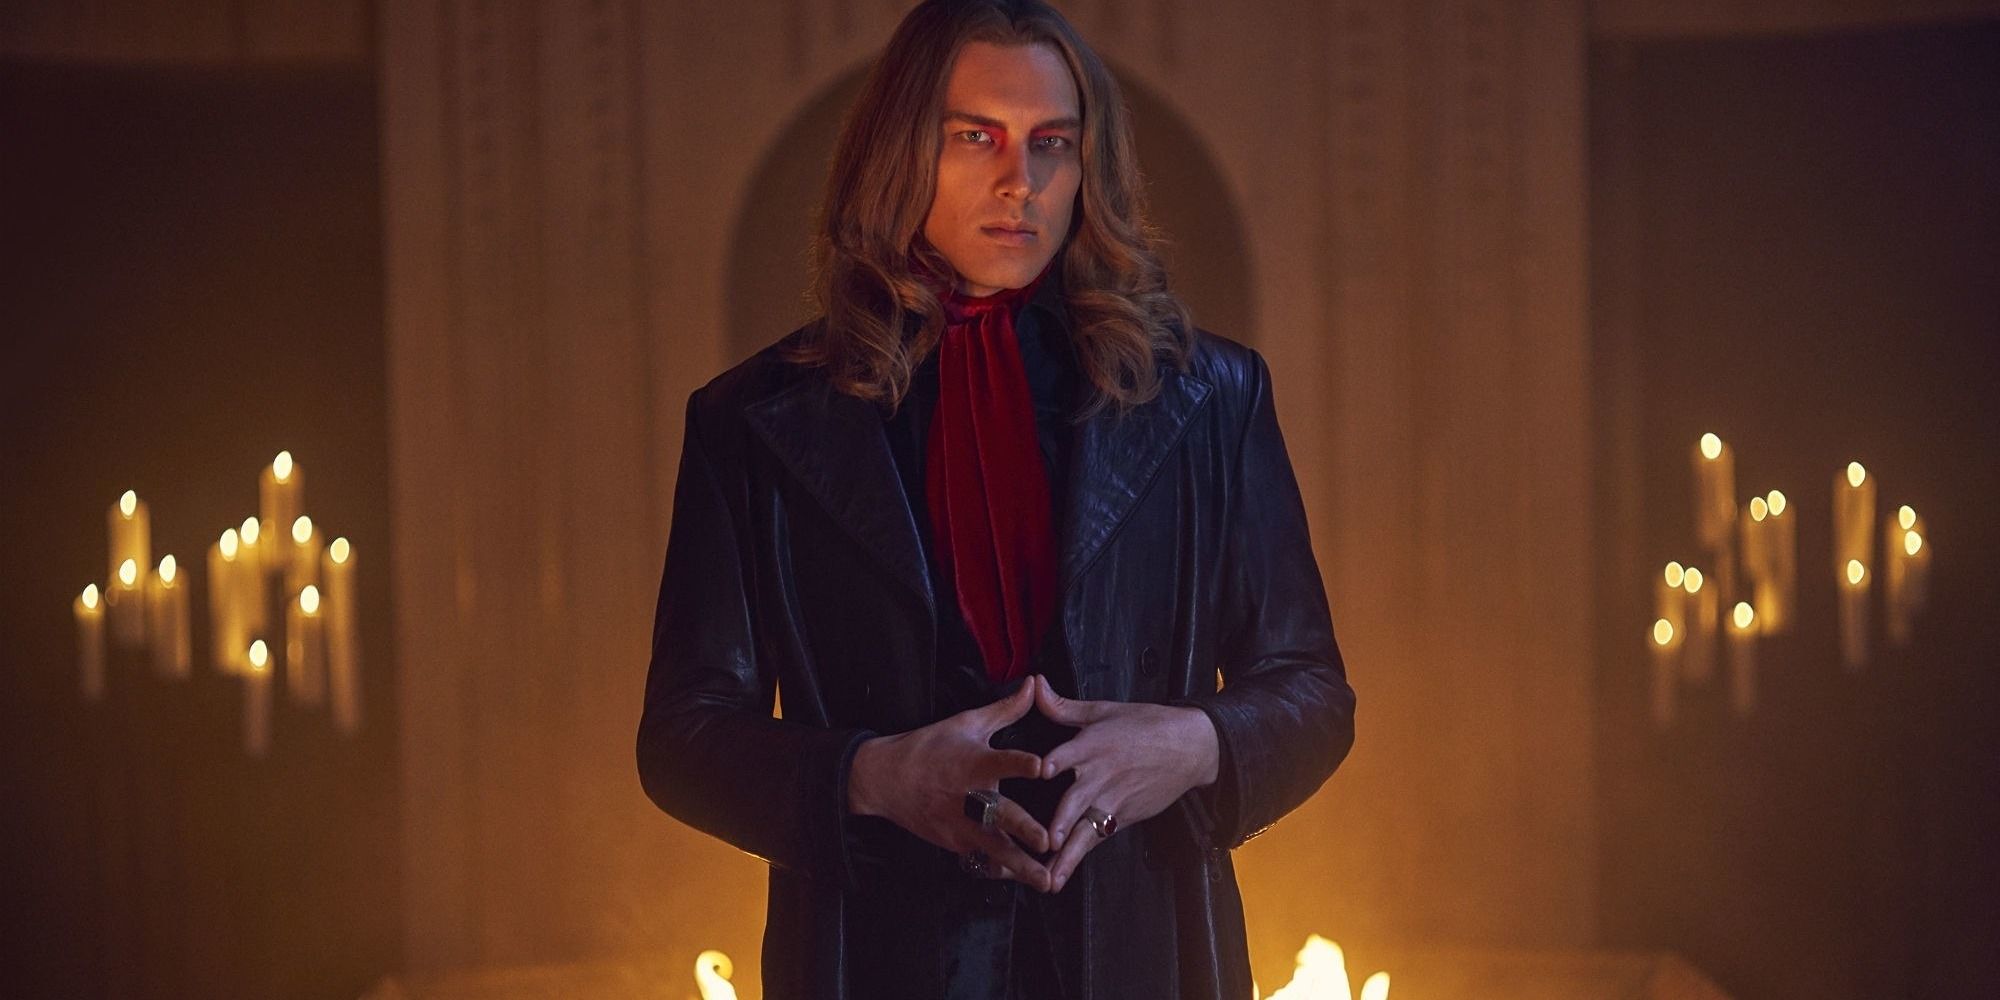 Cody Fern as Michael Langdon in a candlelit room